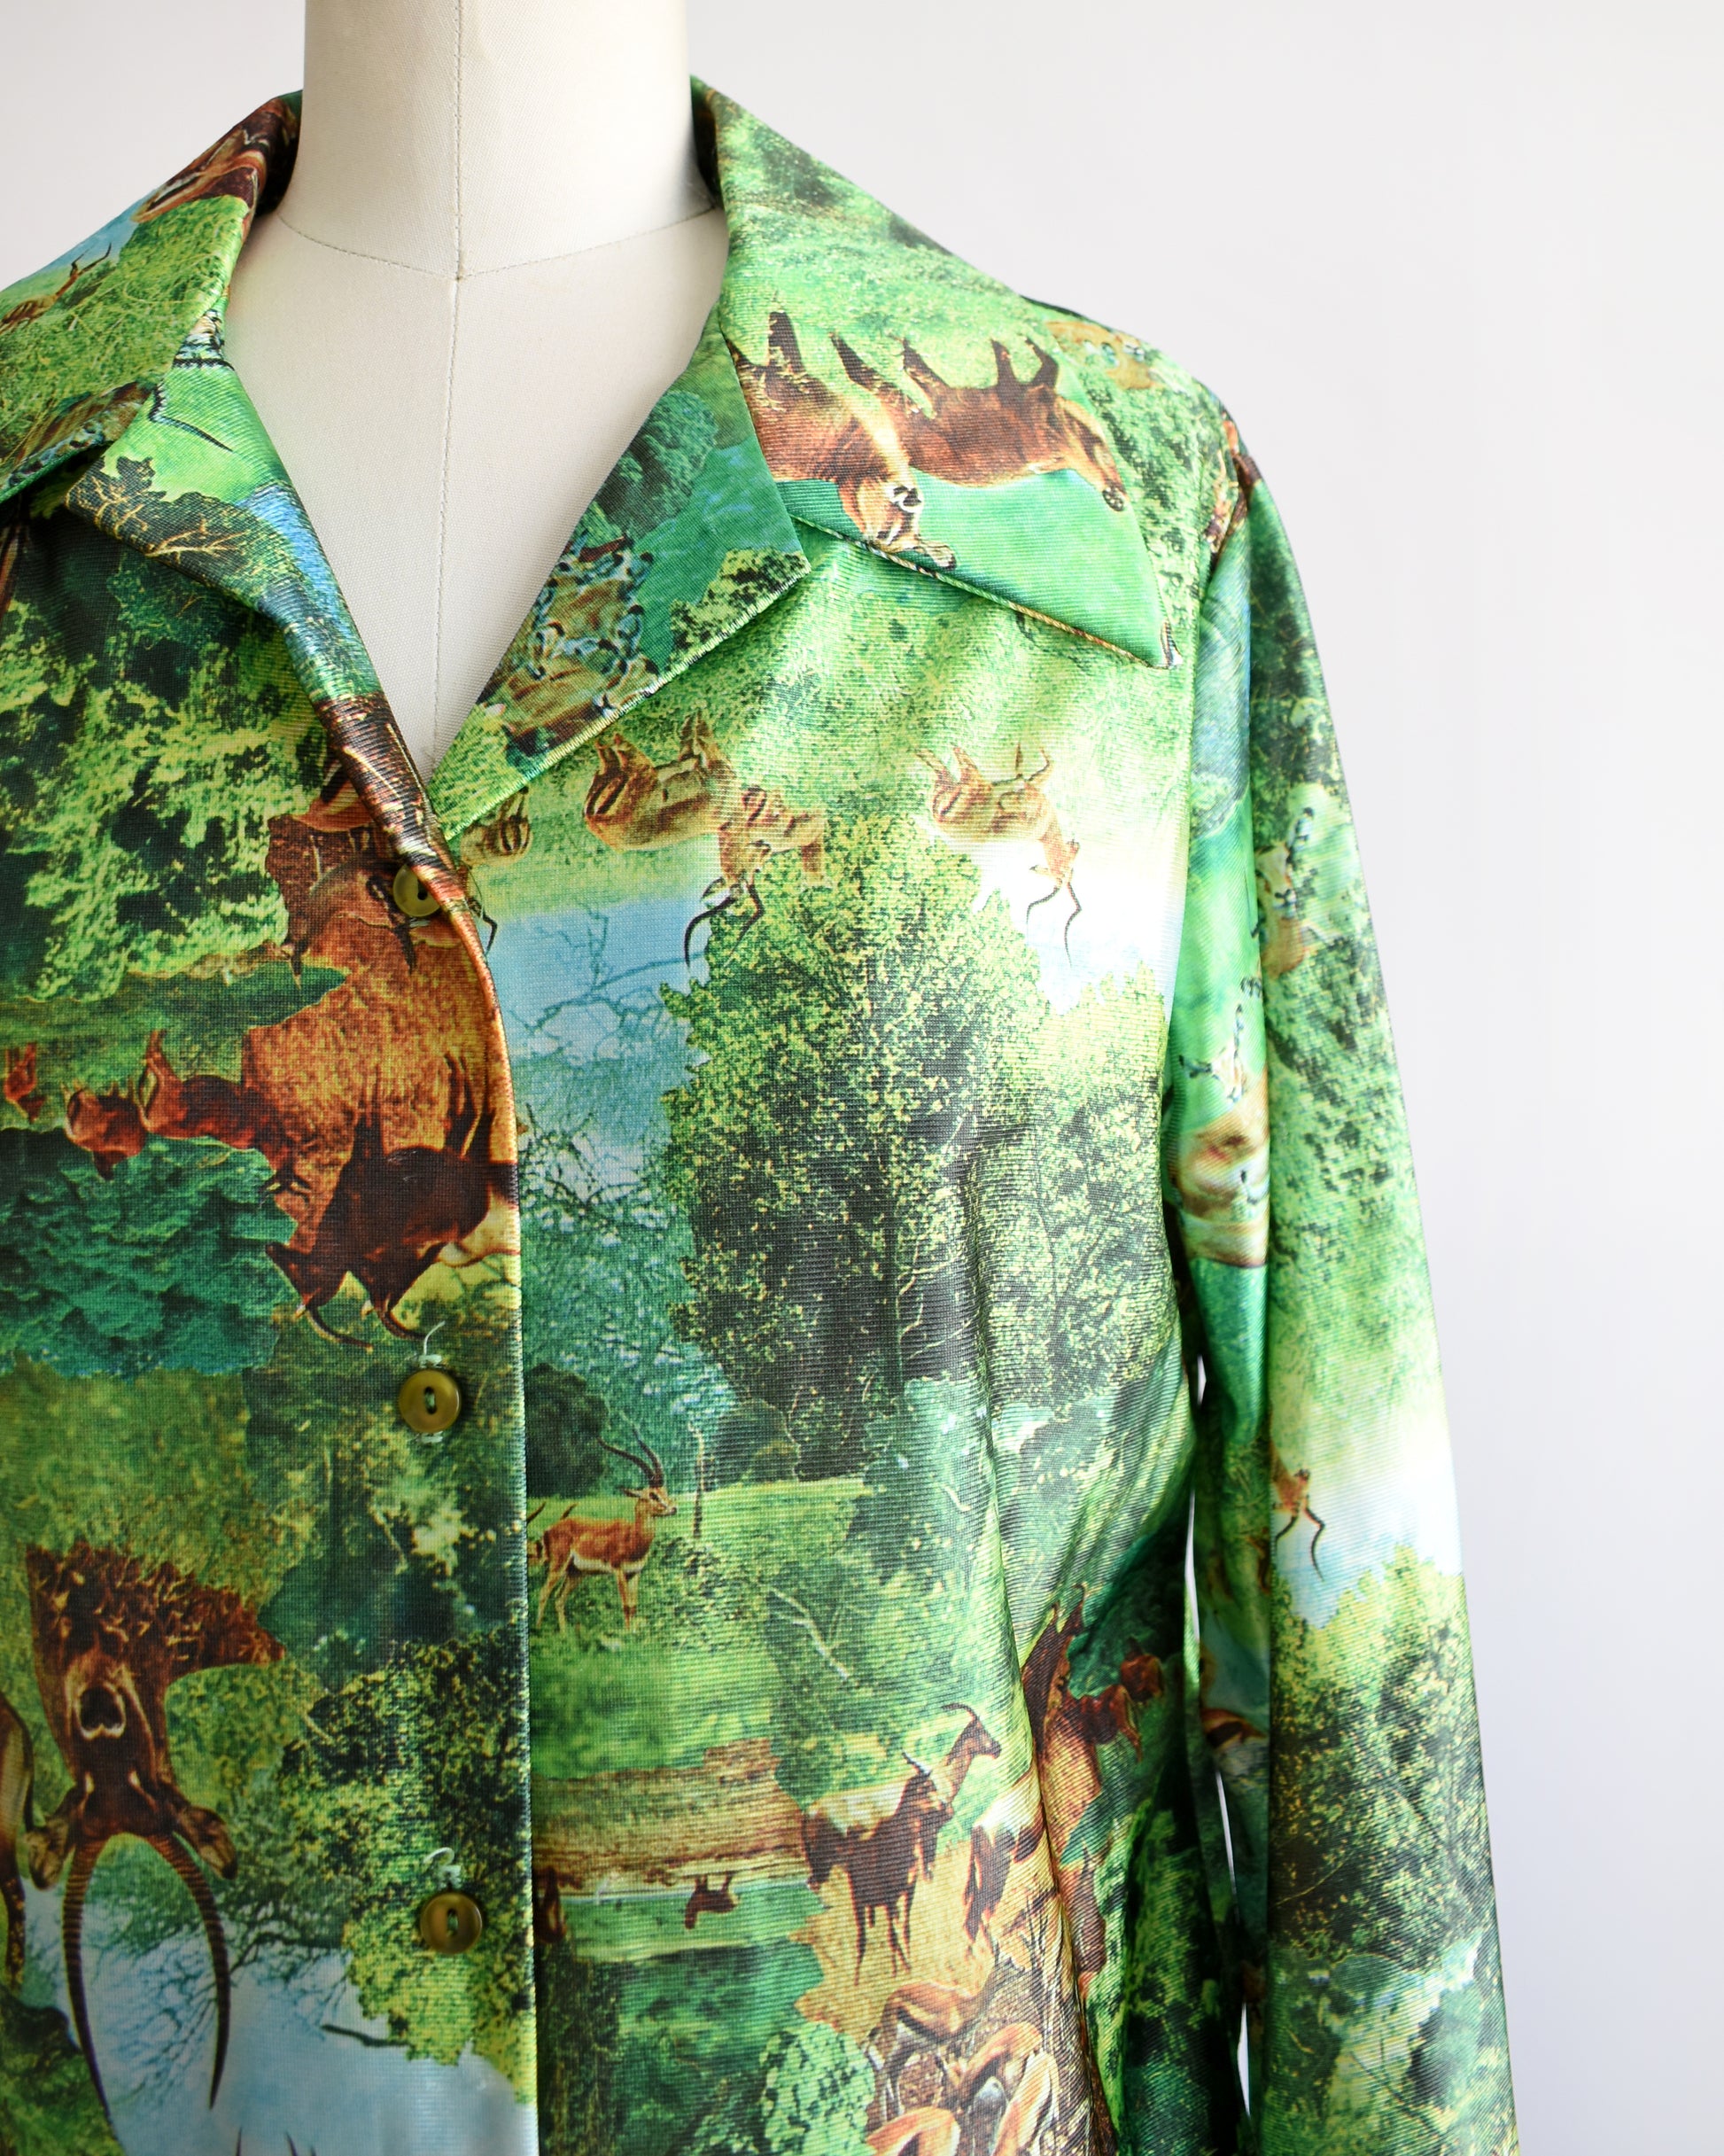 Close up of a vintage 70s green disco blouse that features a realistic photo print of different antelopes in different settings.